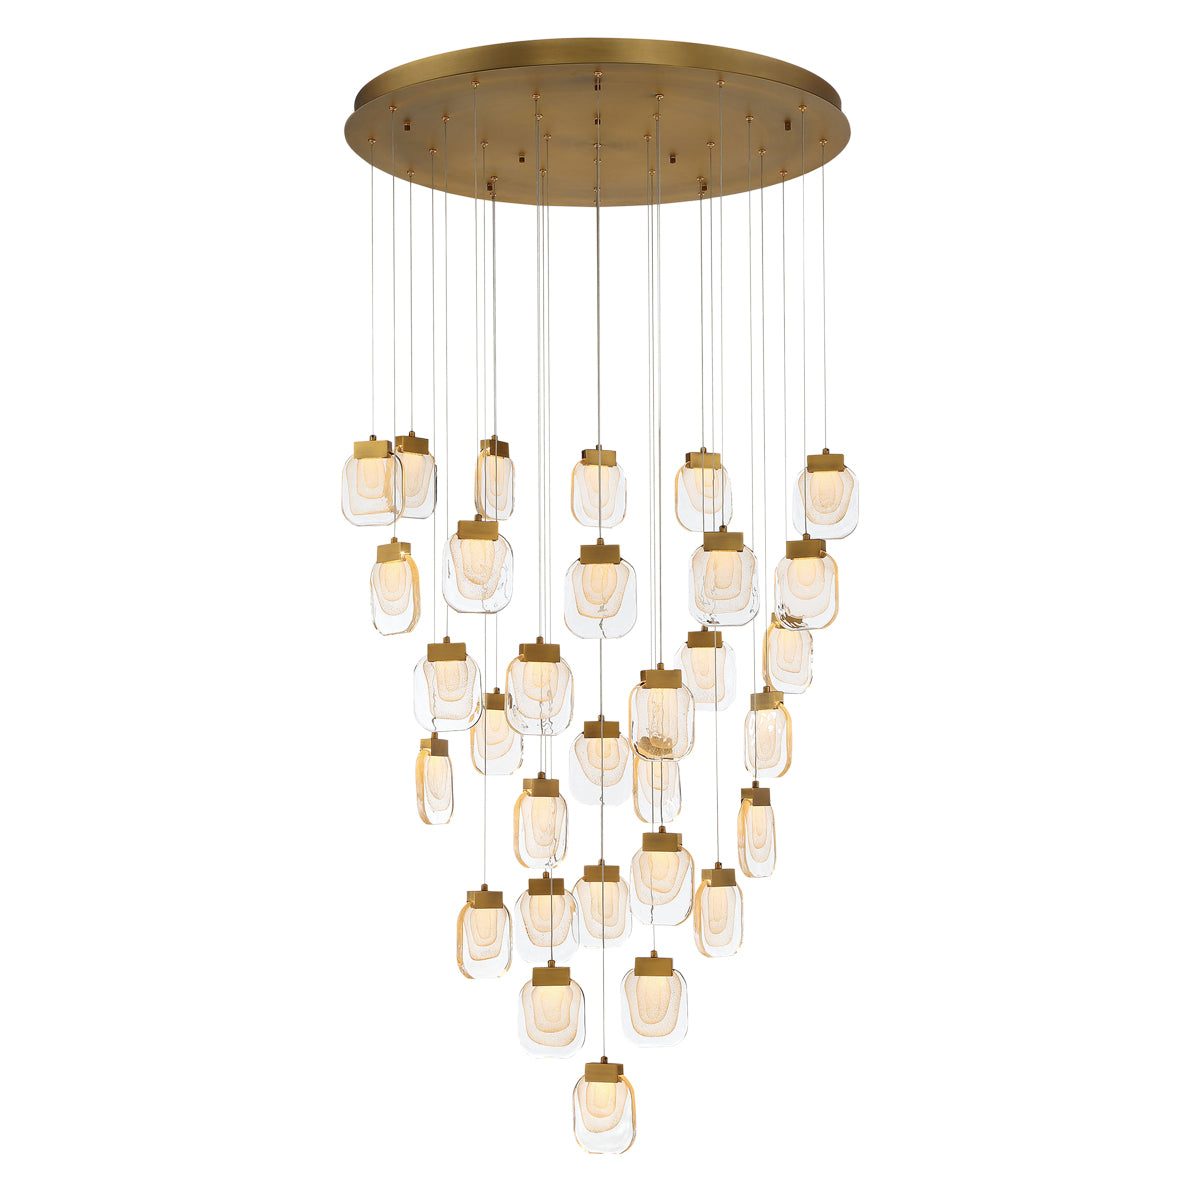 PAGET Chandelier Or - 37193-010 | EUROFASE